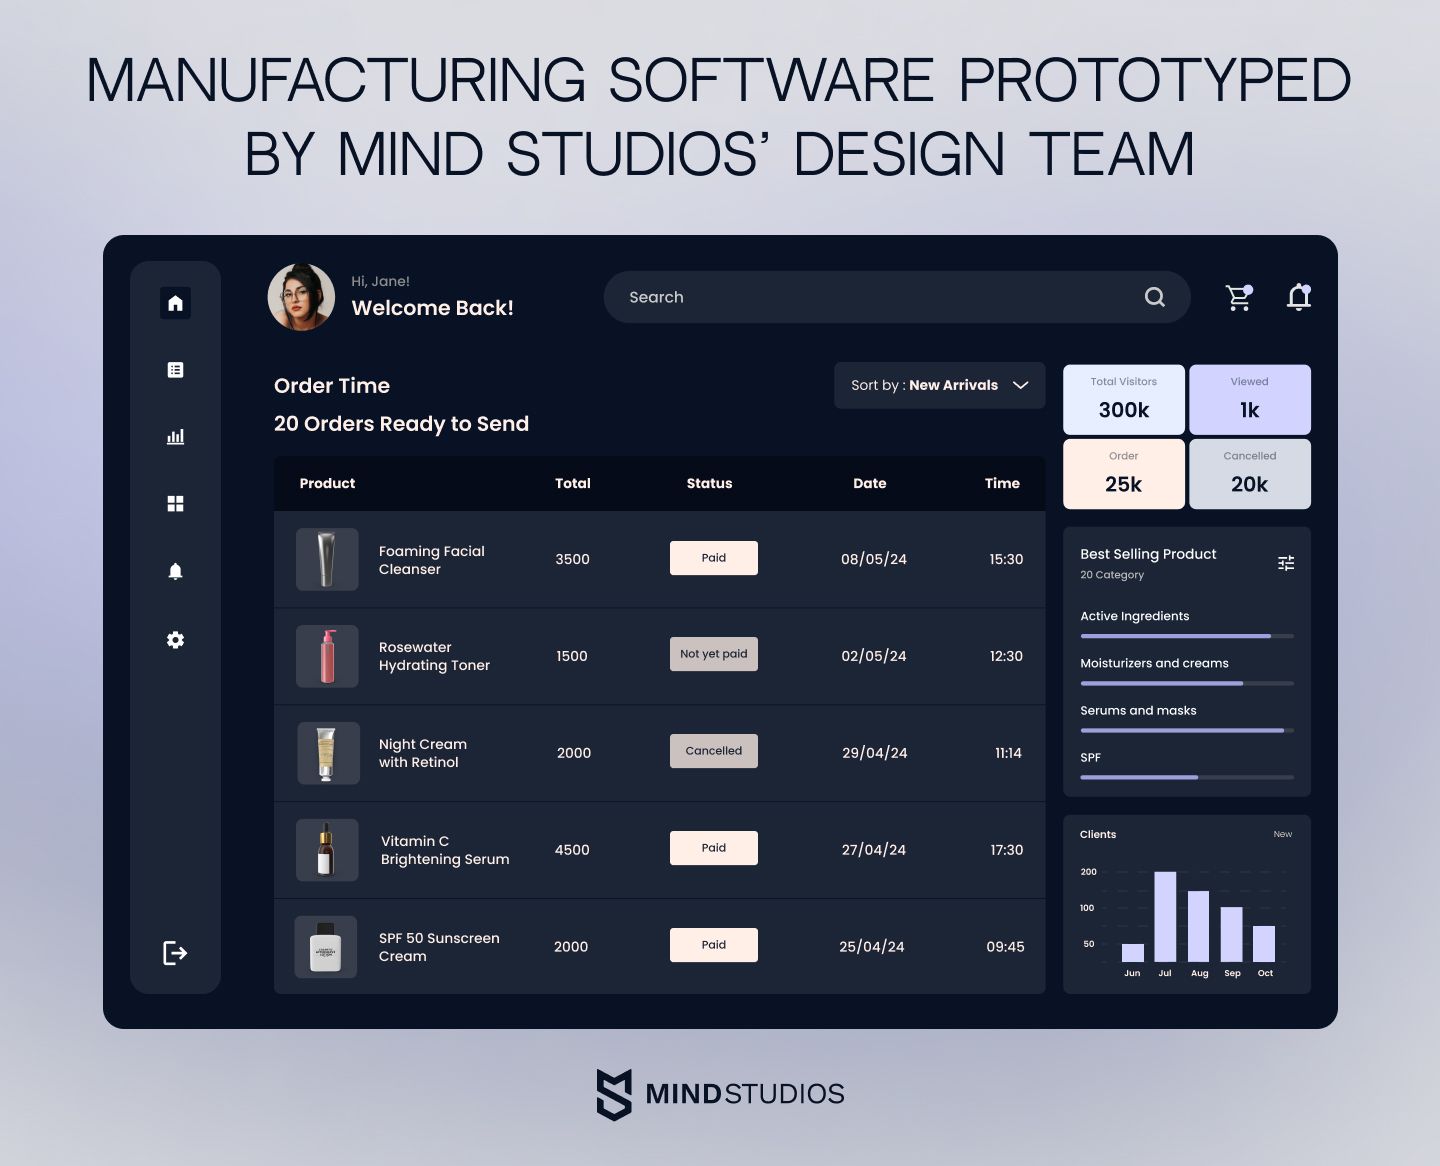 Manufacturing software prototyped by Mind Studios’ design team